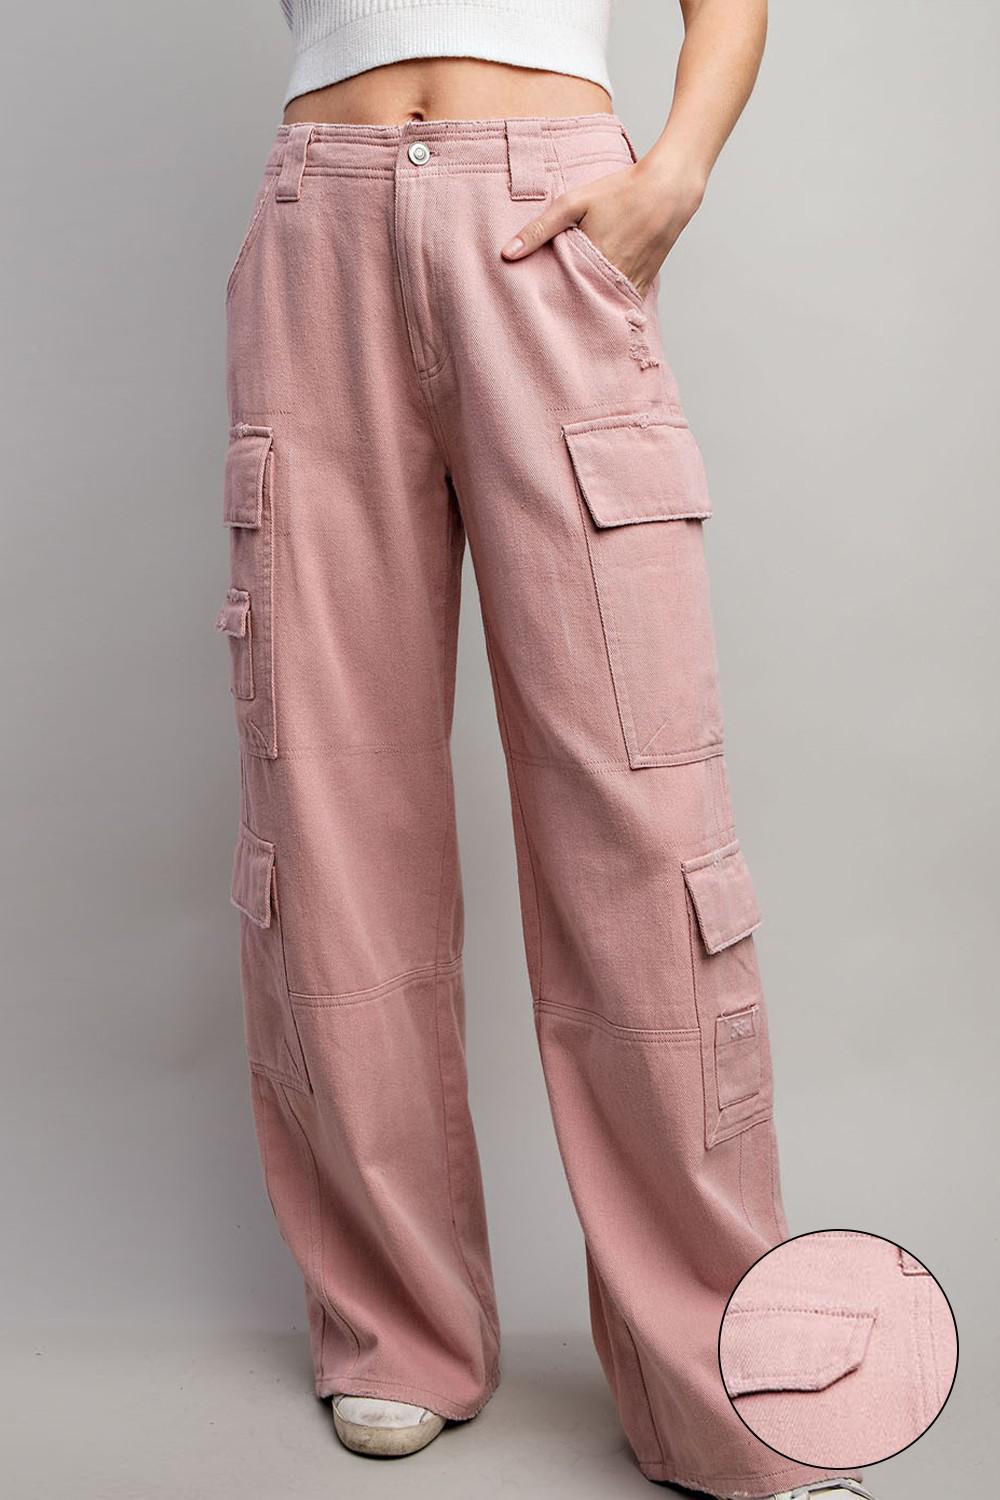 Pink Mineral Cargo Pants